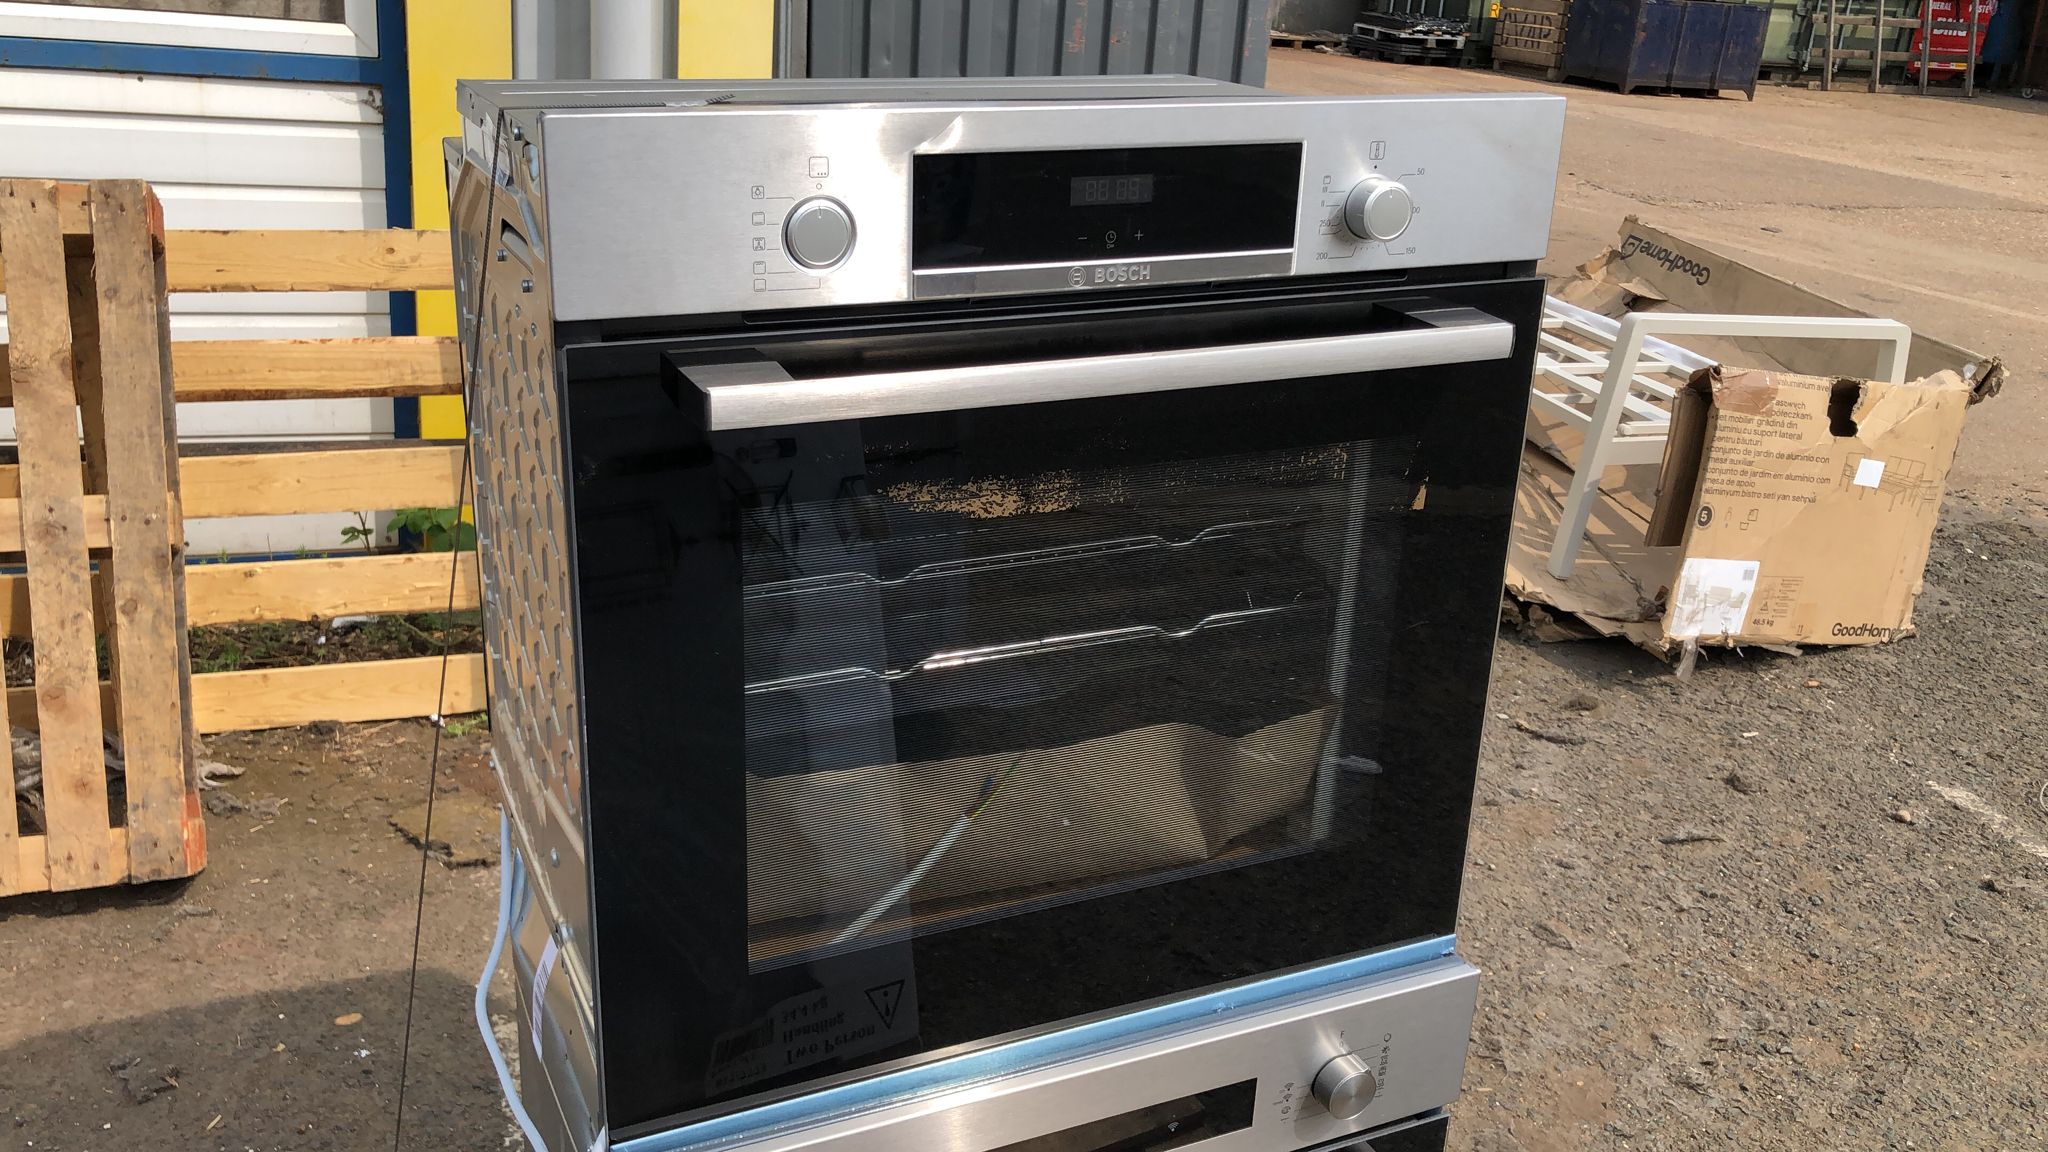 BOSCH Serie 4 HBS534BS0B Built-in Single Multifunction Electric Oven -Cosmetic Damage 6105